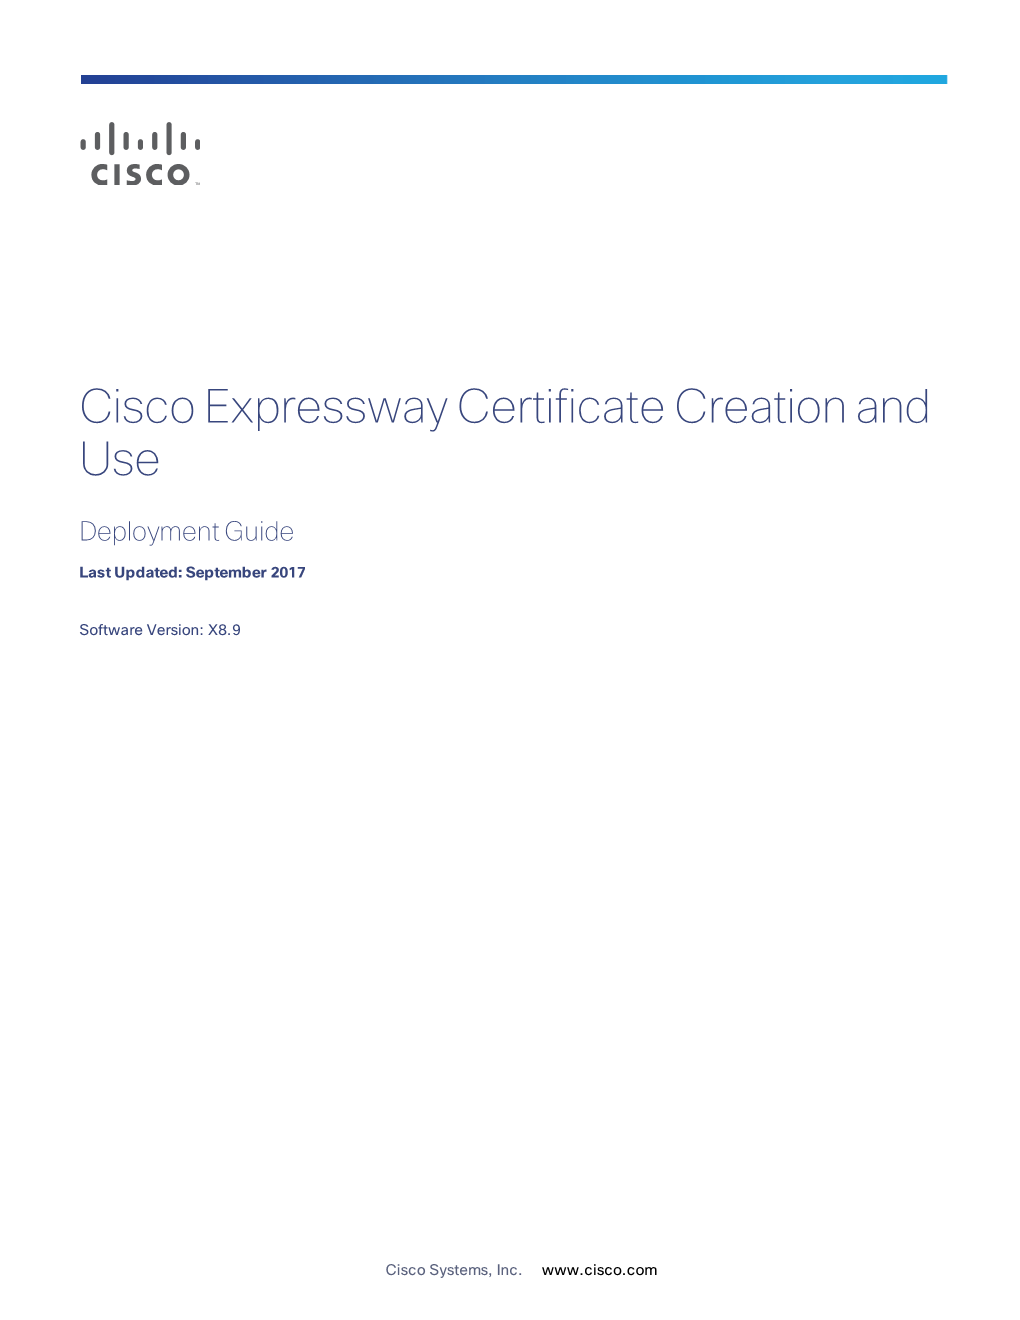 Cisco Expressway Certificate Creation and Use Deployment Guide (X8.9)